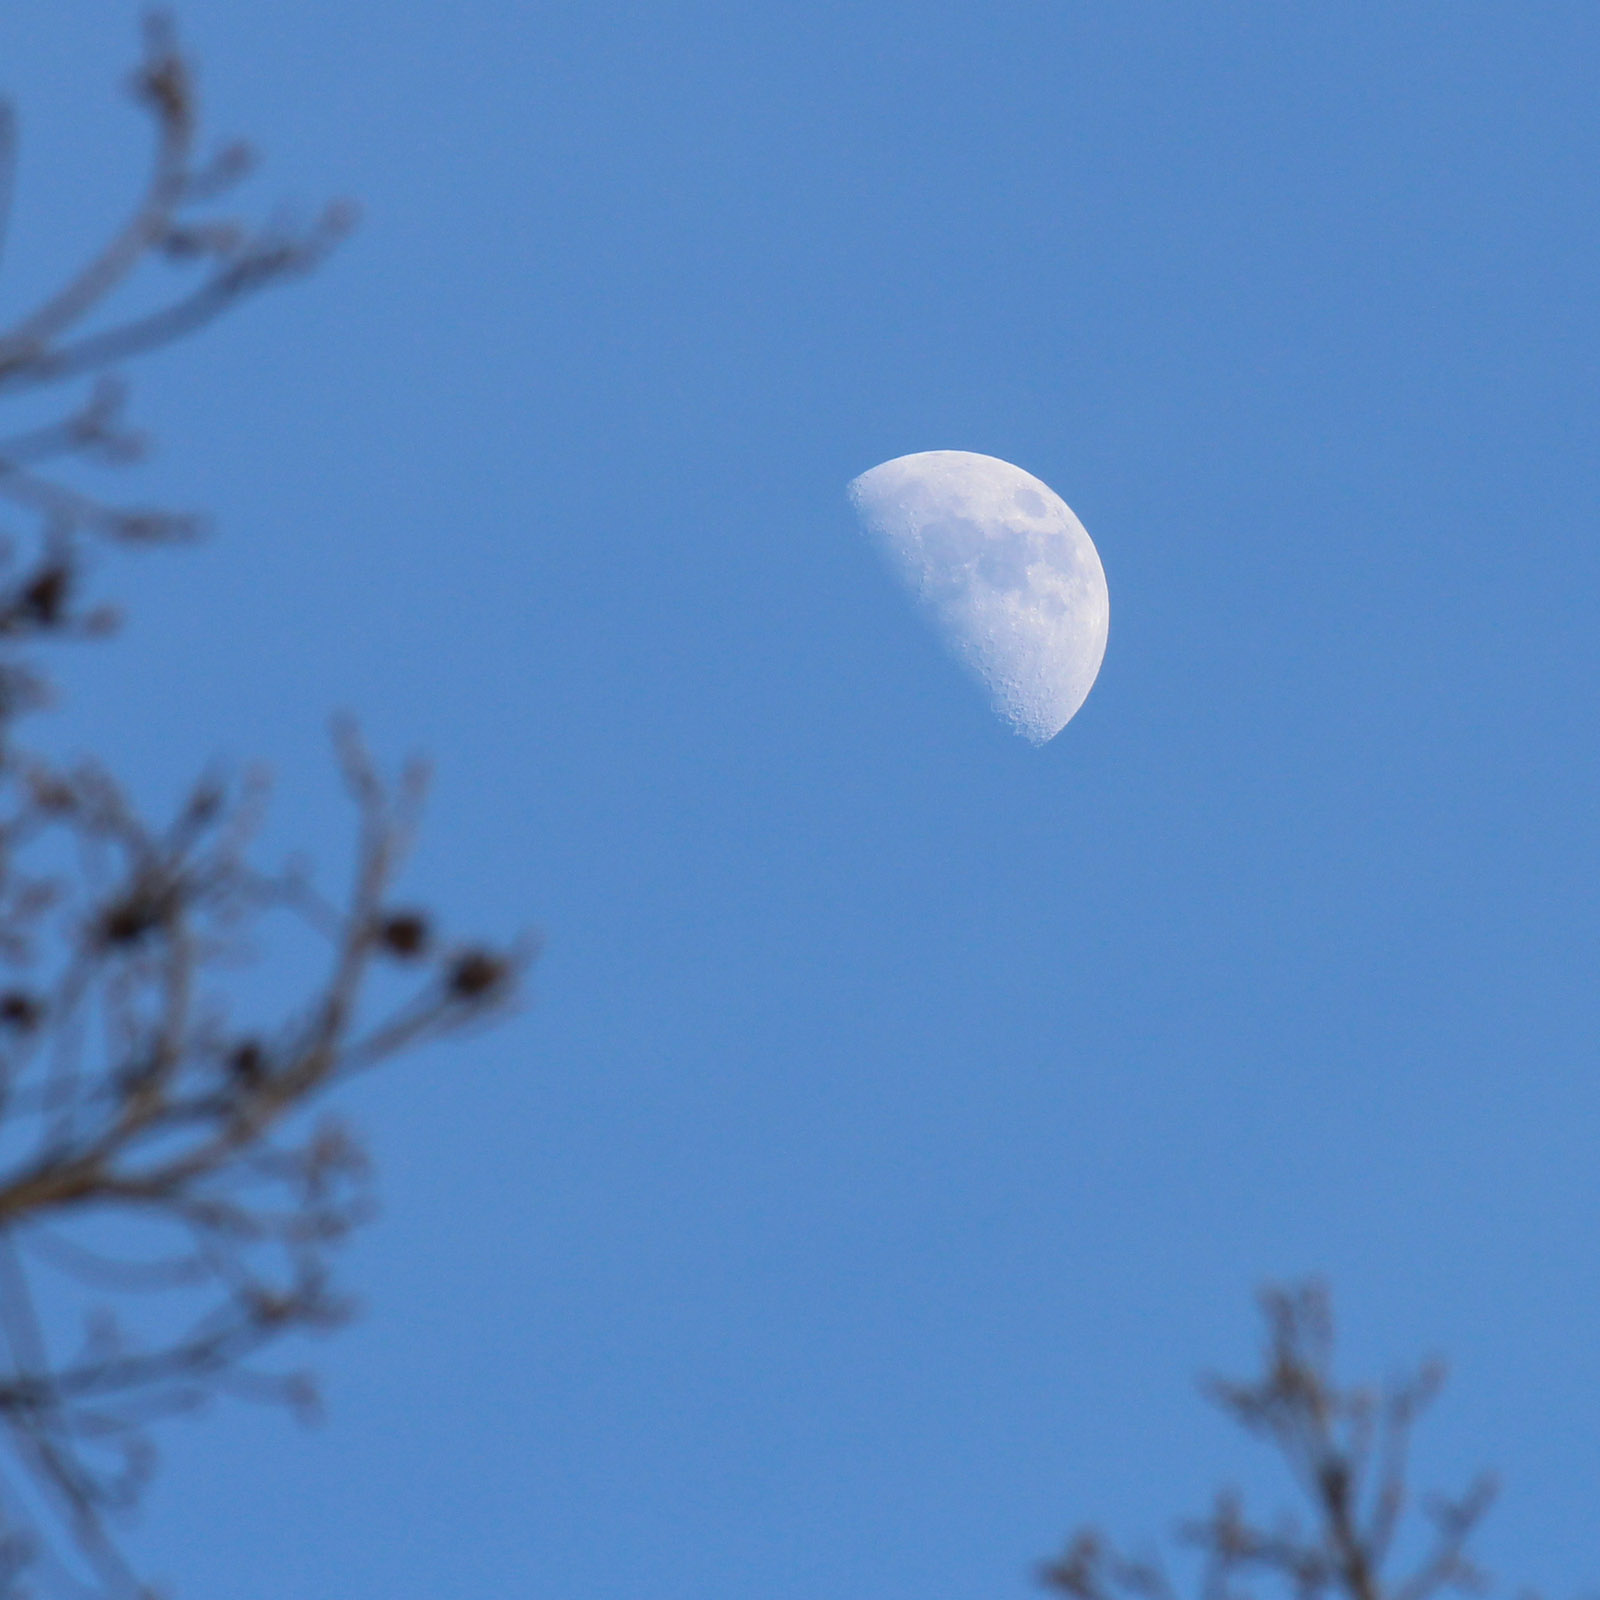 A half-moon is tilted against a blue sky. Slightly blurry branches are in the foreground.